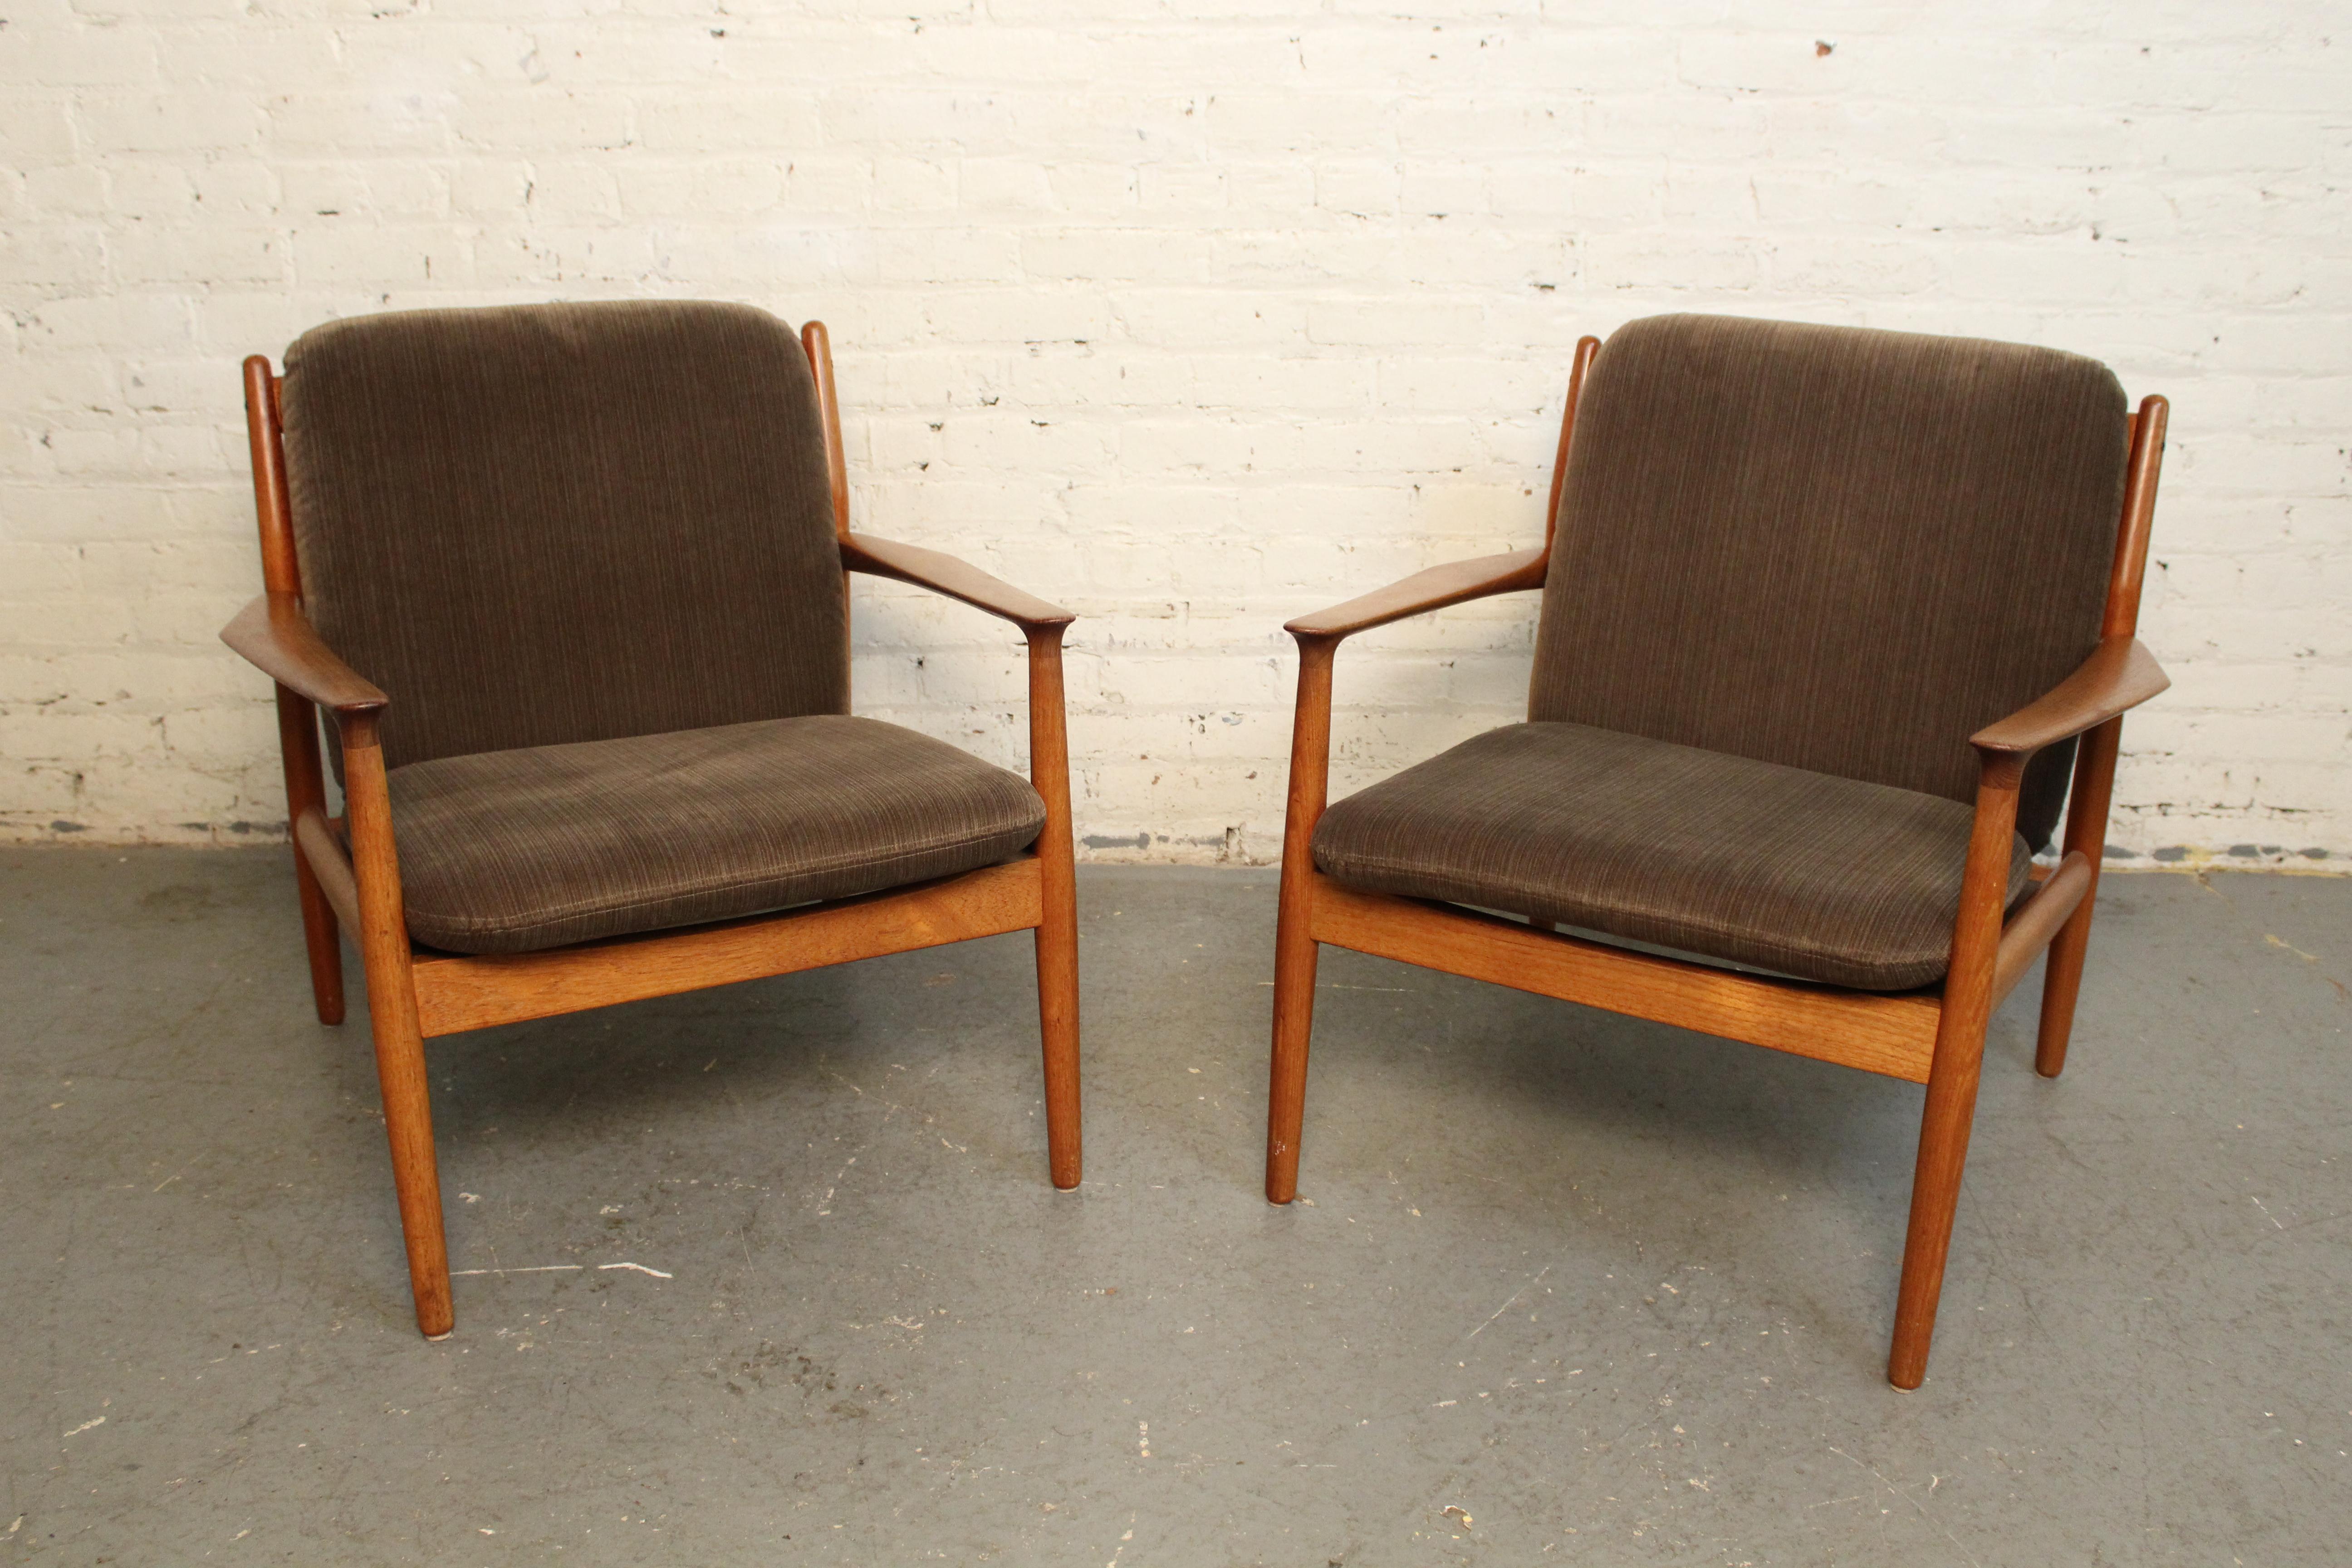 Spruce up any space with vintage Danish teak furniture! Don't miss out of these fantastic mid-century modern chairs conceived by award-winning designer Svend Åge Eriksen and produced by the master Scandinavian craftsmen of Glostrup Møbelfabrik. The